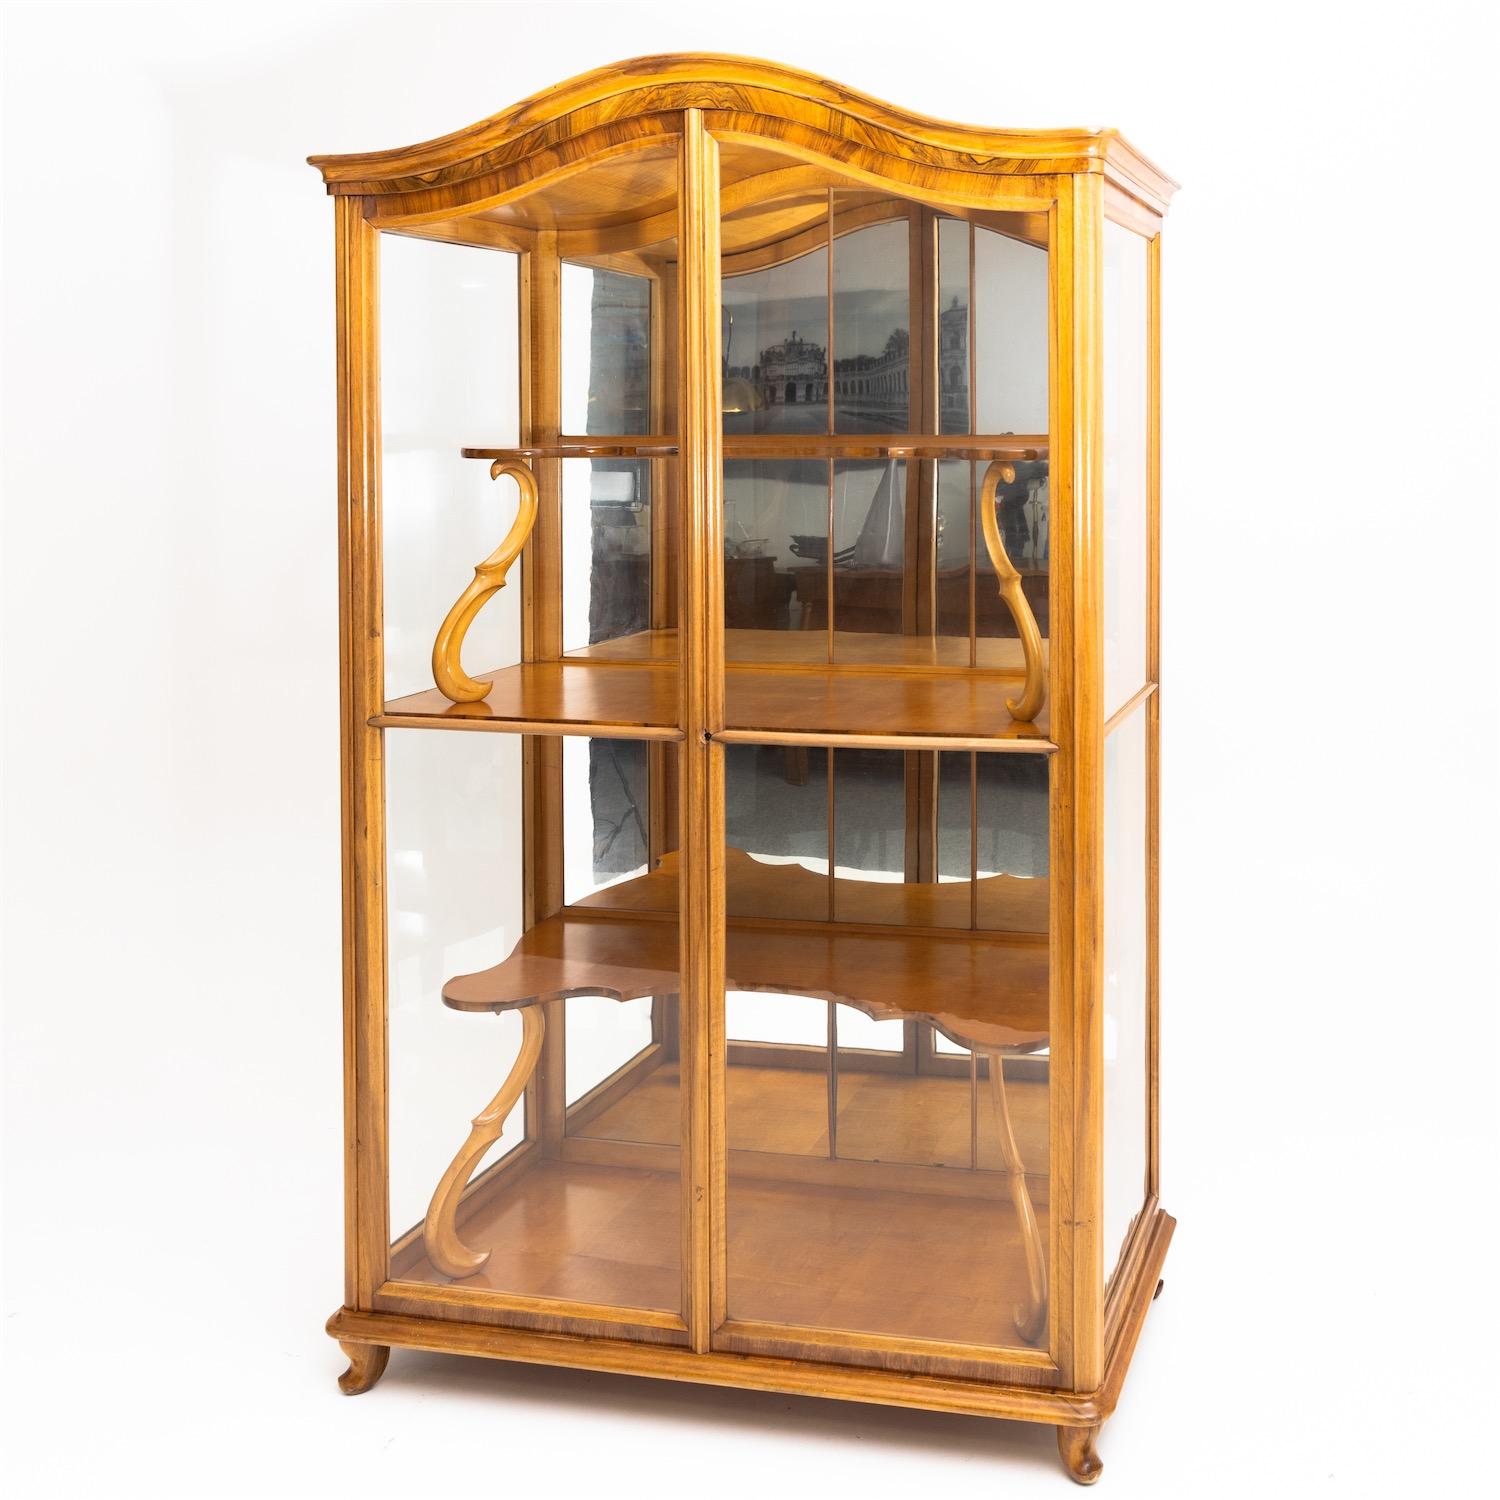 Late Biedermeier display case glazed on three sides with a curved pediment standing on low curved feet. The interior division consists of a full-length shelf and f-shaped supports with curved cut-out recessed shelves. The back is mirrored. Walnut,